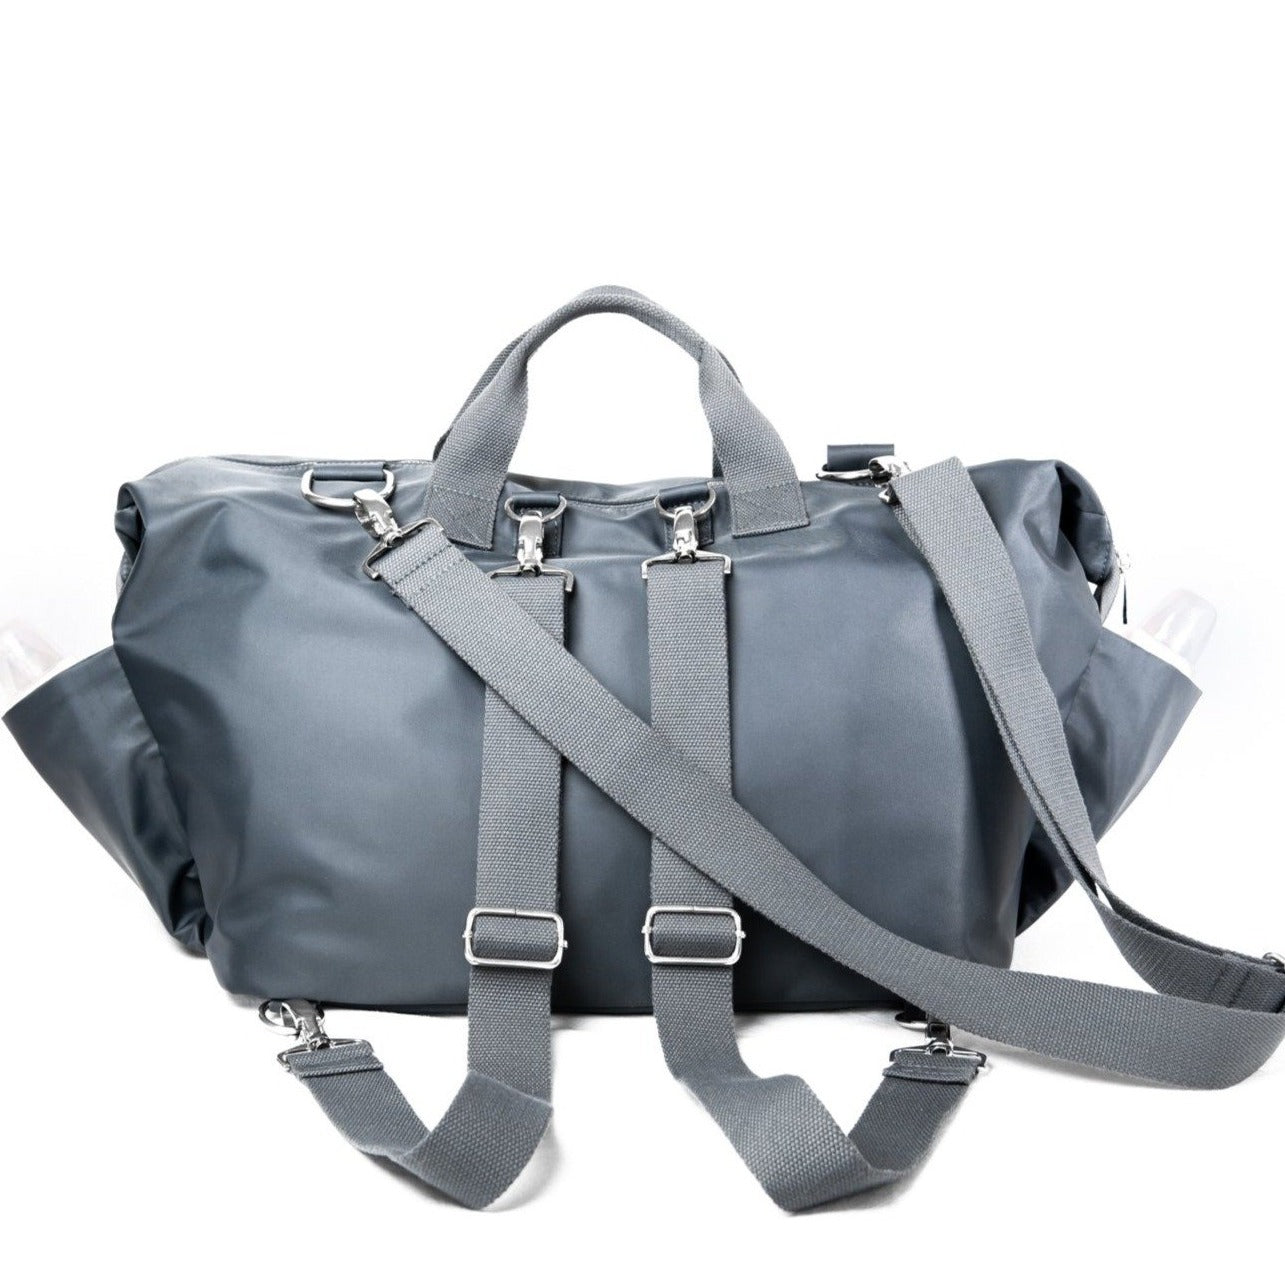 alt="back of Mummas Wear The DUFFLE Nappy Bag showing removable and adjustable backpack and crossbody straps"